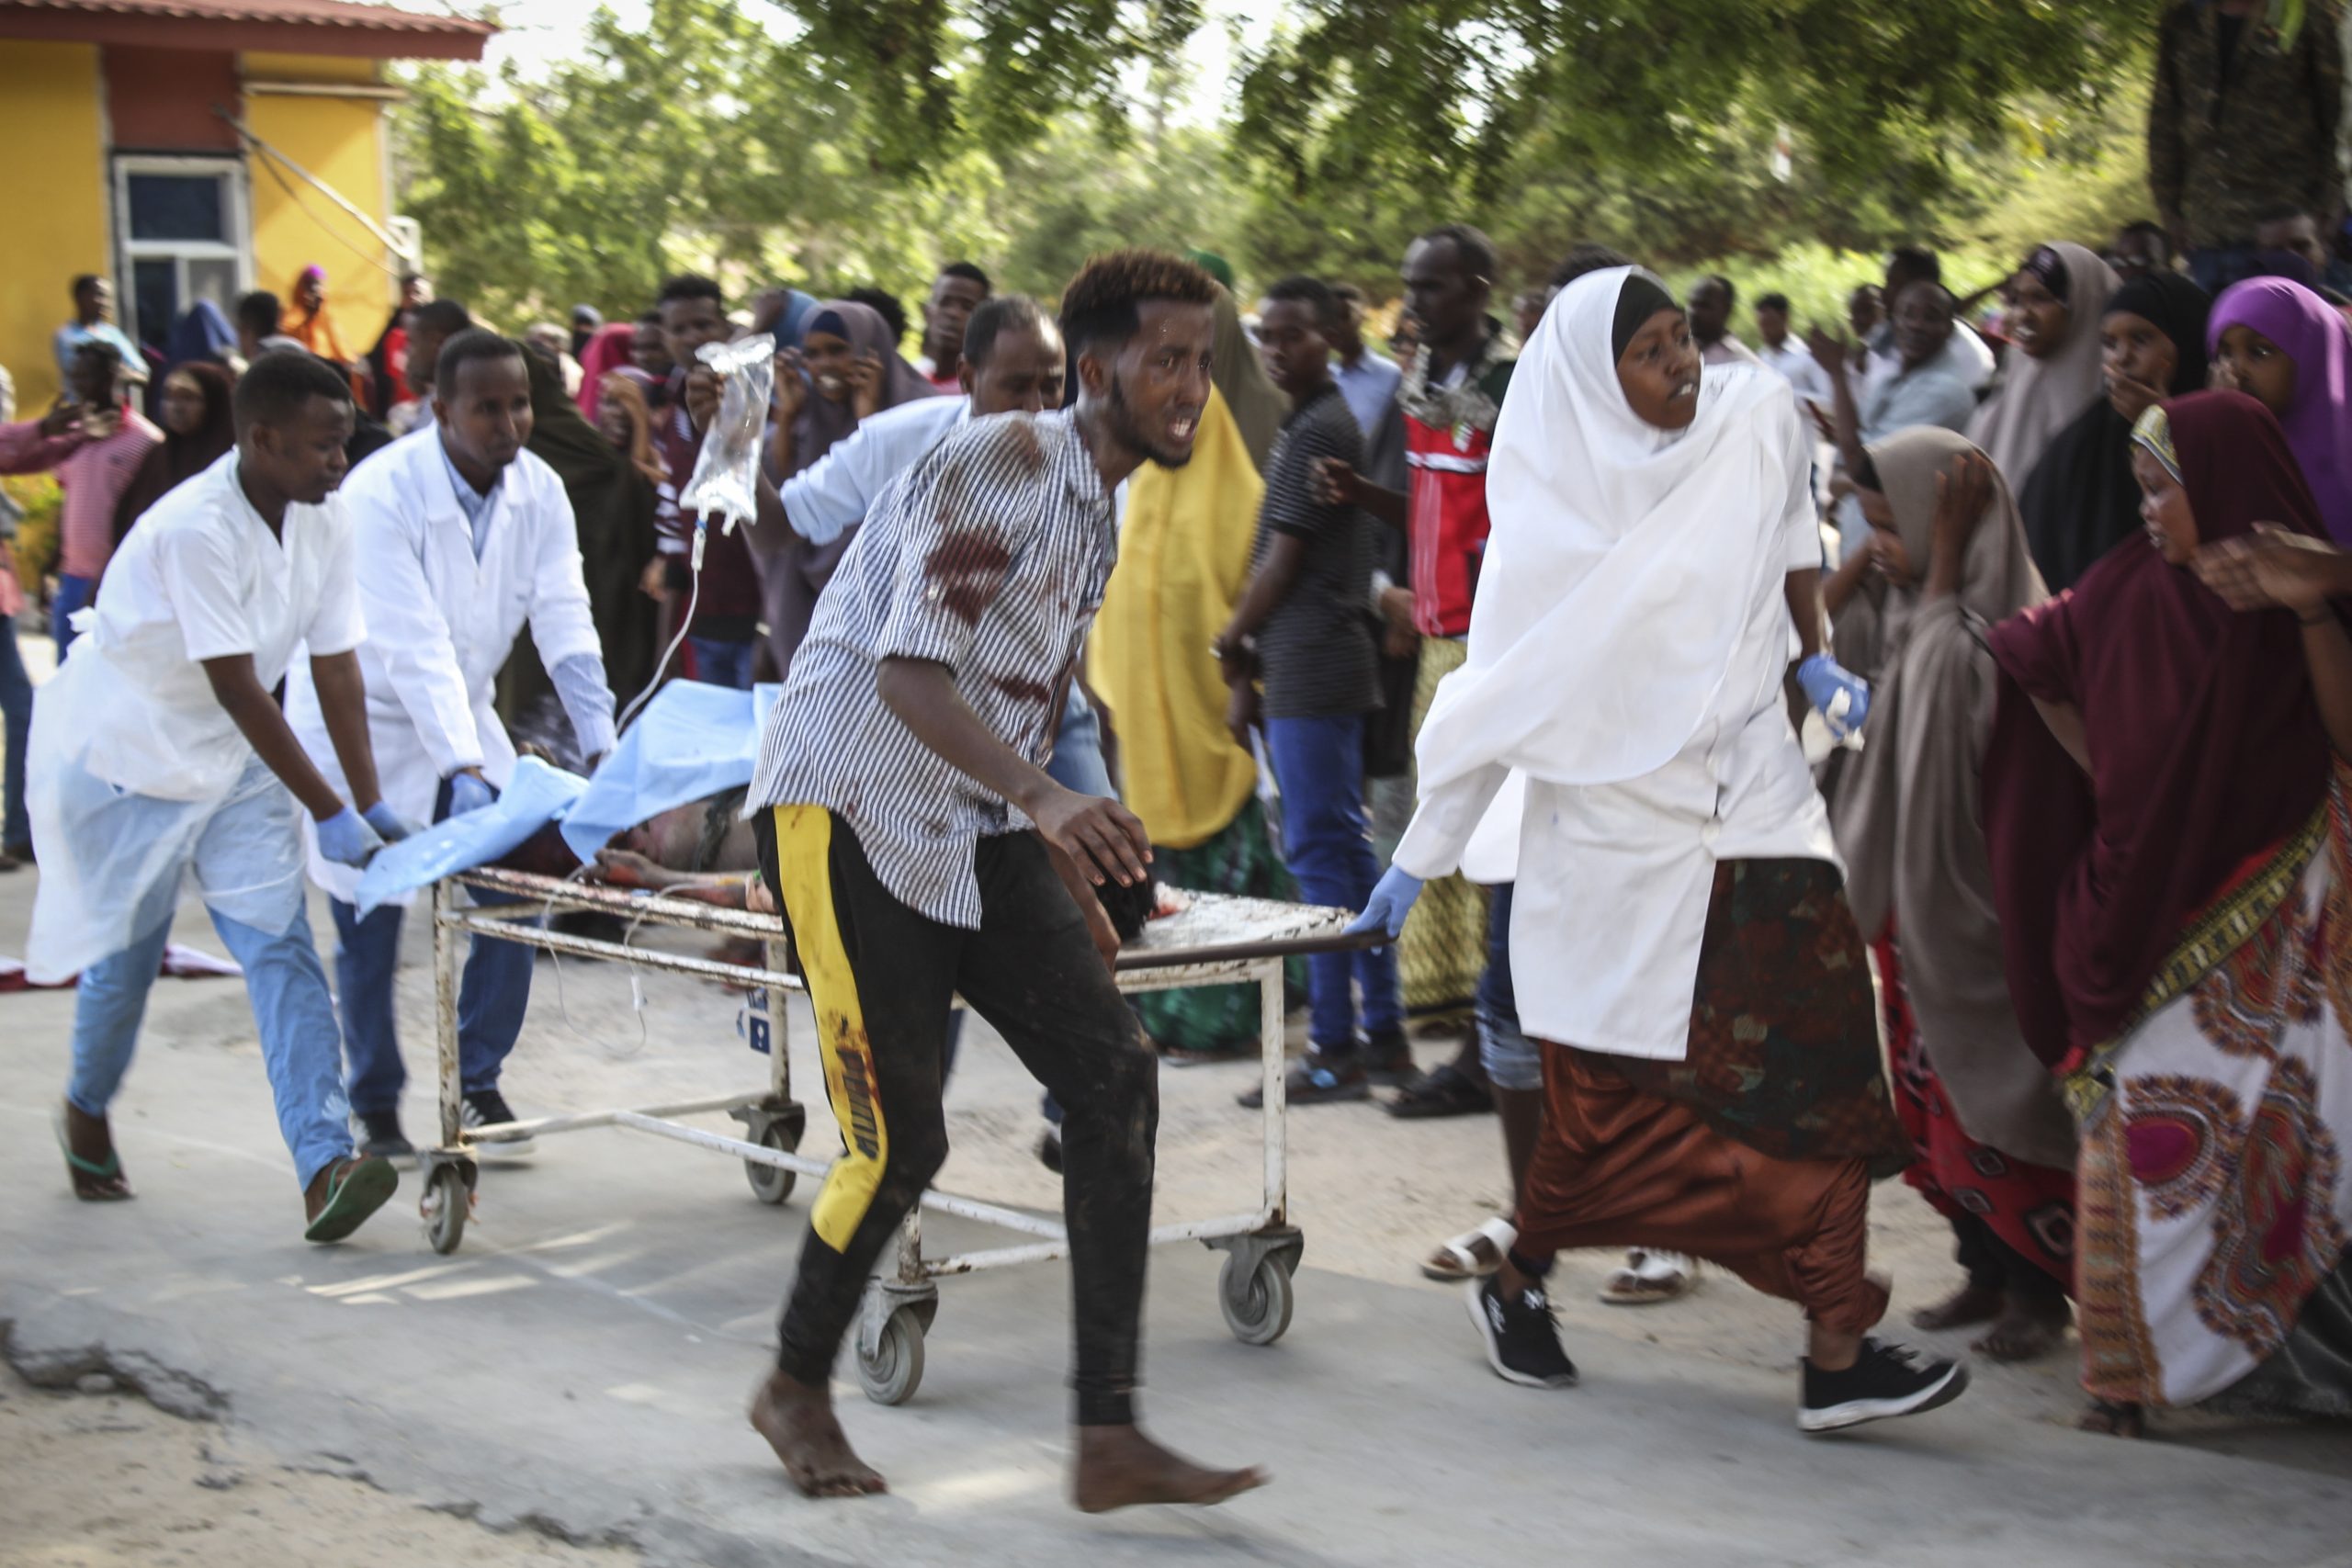 epa08092312 A wounded person is carried on a stretcher at Medina hospital in Mogadishu, Somalia, 28 December 2019. According reports, a large explosion rocked the area near Ex-control Afgoye. Initial police reports said at least five people were killed in what is believed to have been a car bombing.  EPA/SAID YUSUF WARSAME